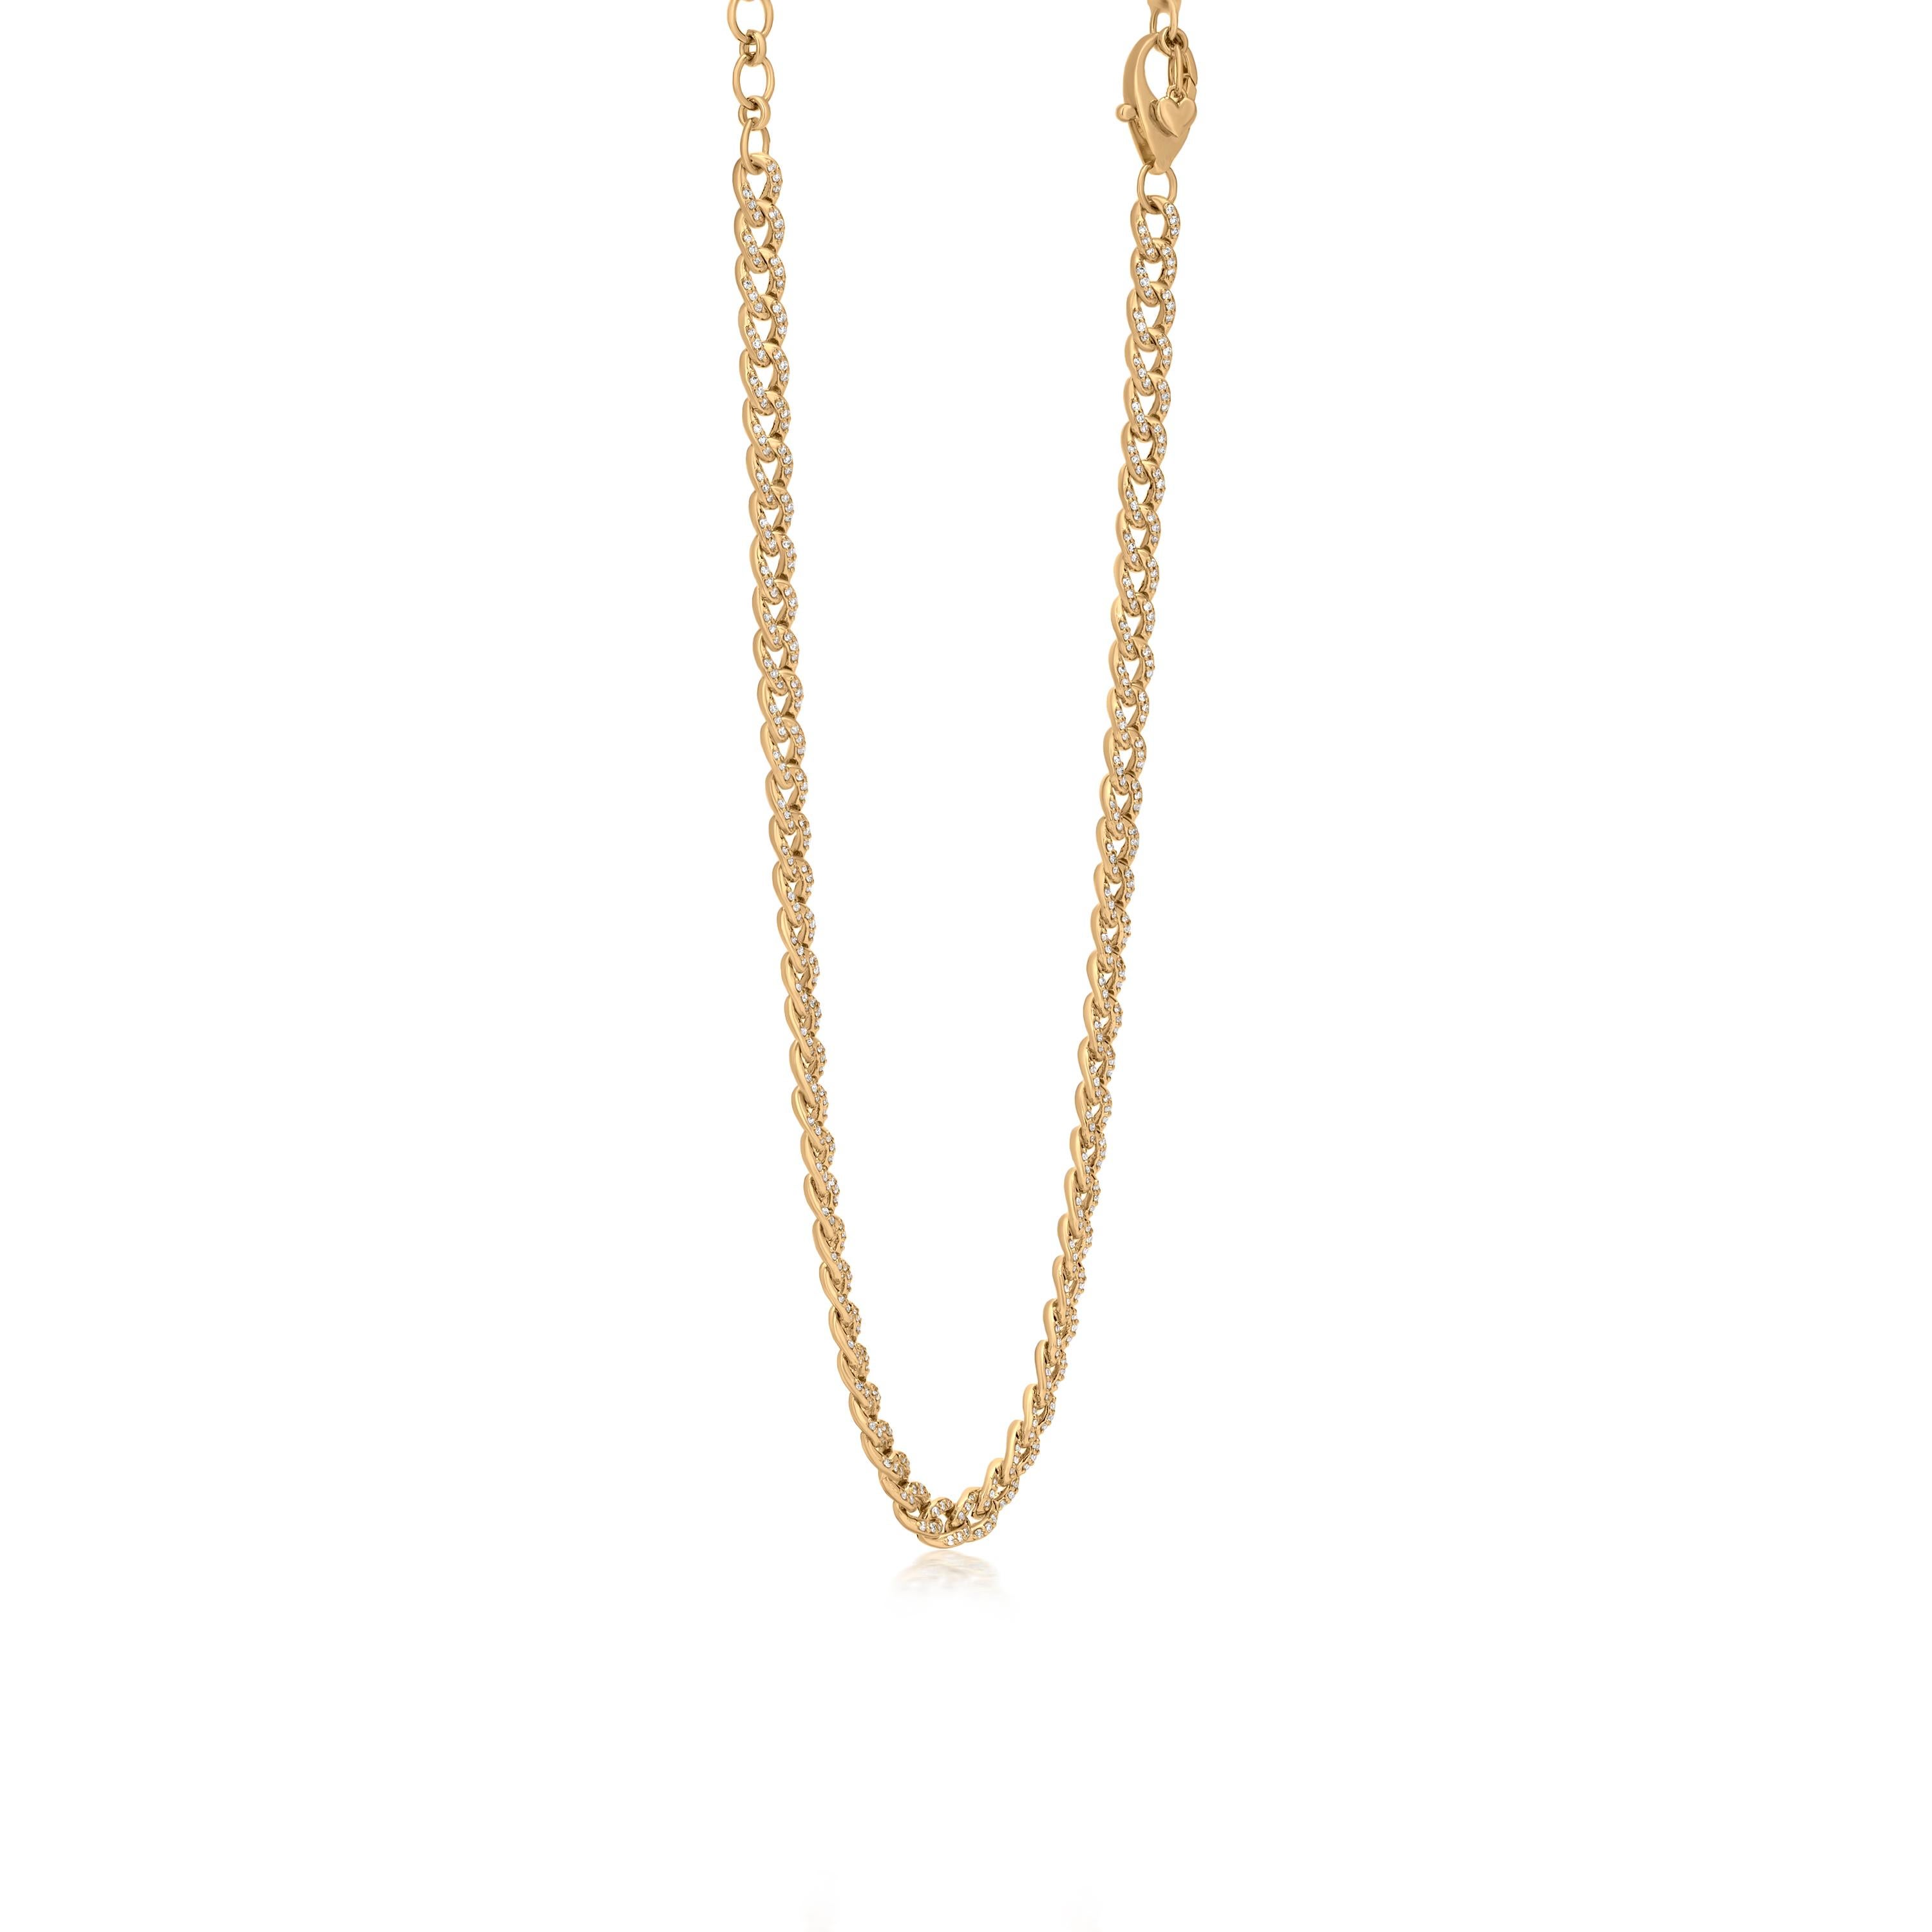 Contemporary Nigaam 1.45 Carat T.W. White Diamond Curb Chain Link Necklace in 18k Yellow Gold